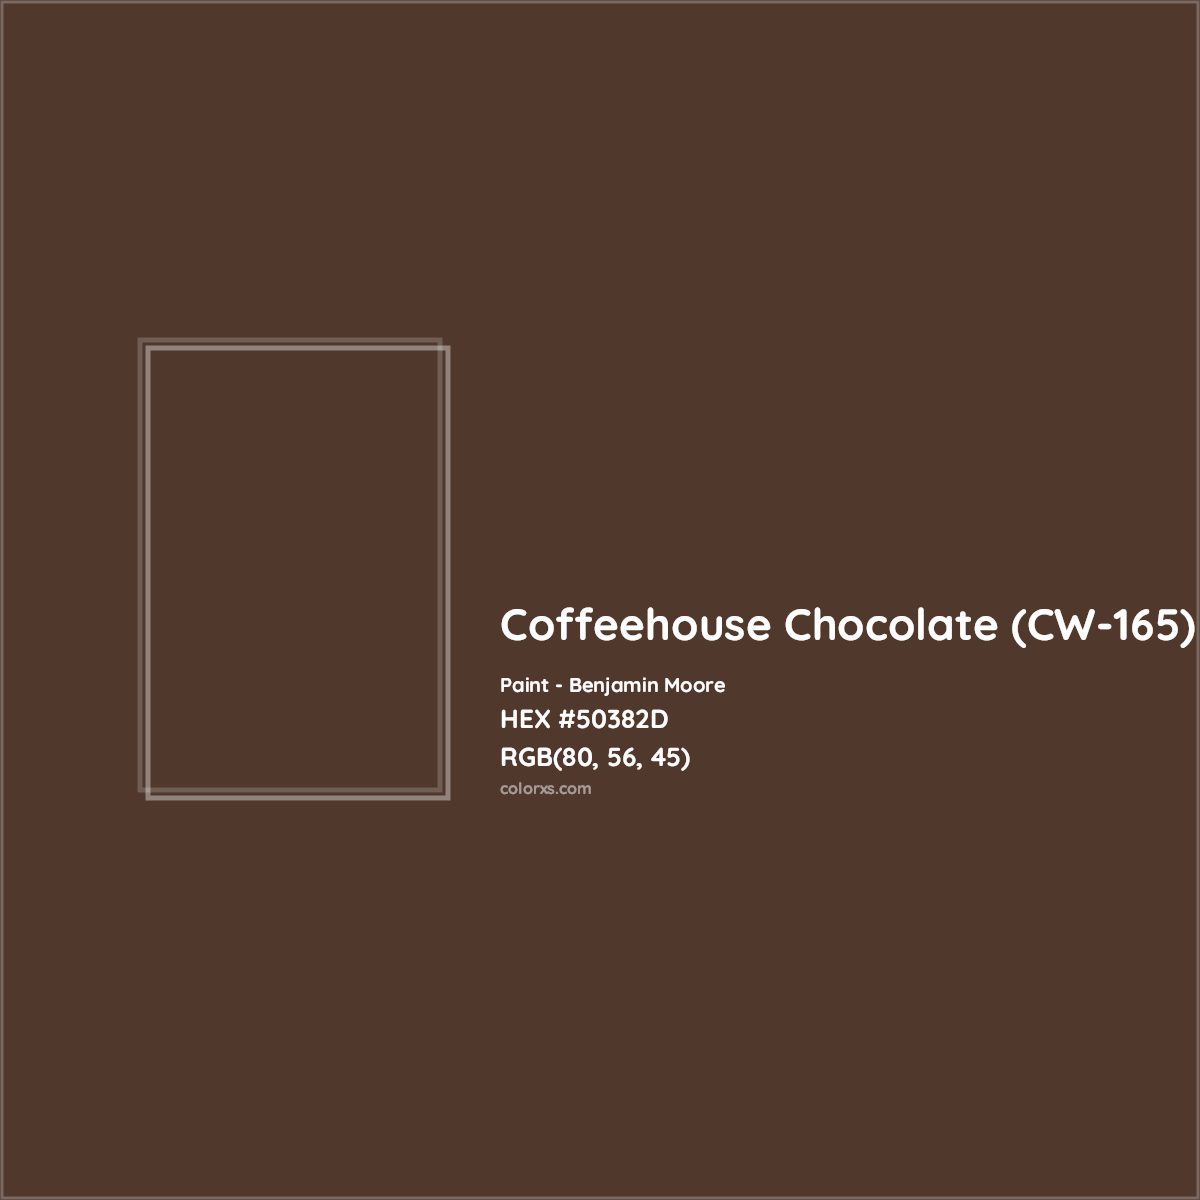 HEX #50382D Coffeehouse Chocolate (CW-165) Paint Benjamin Moore - Color Code